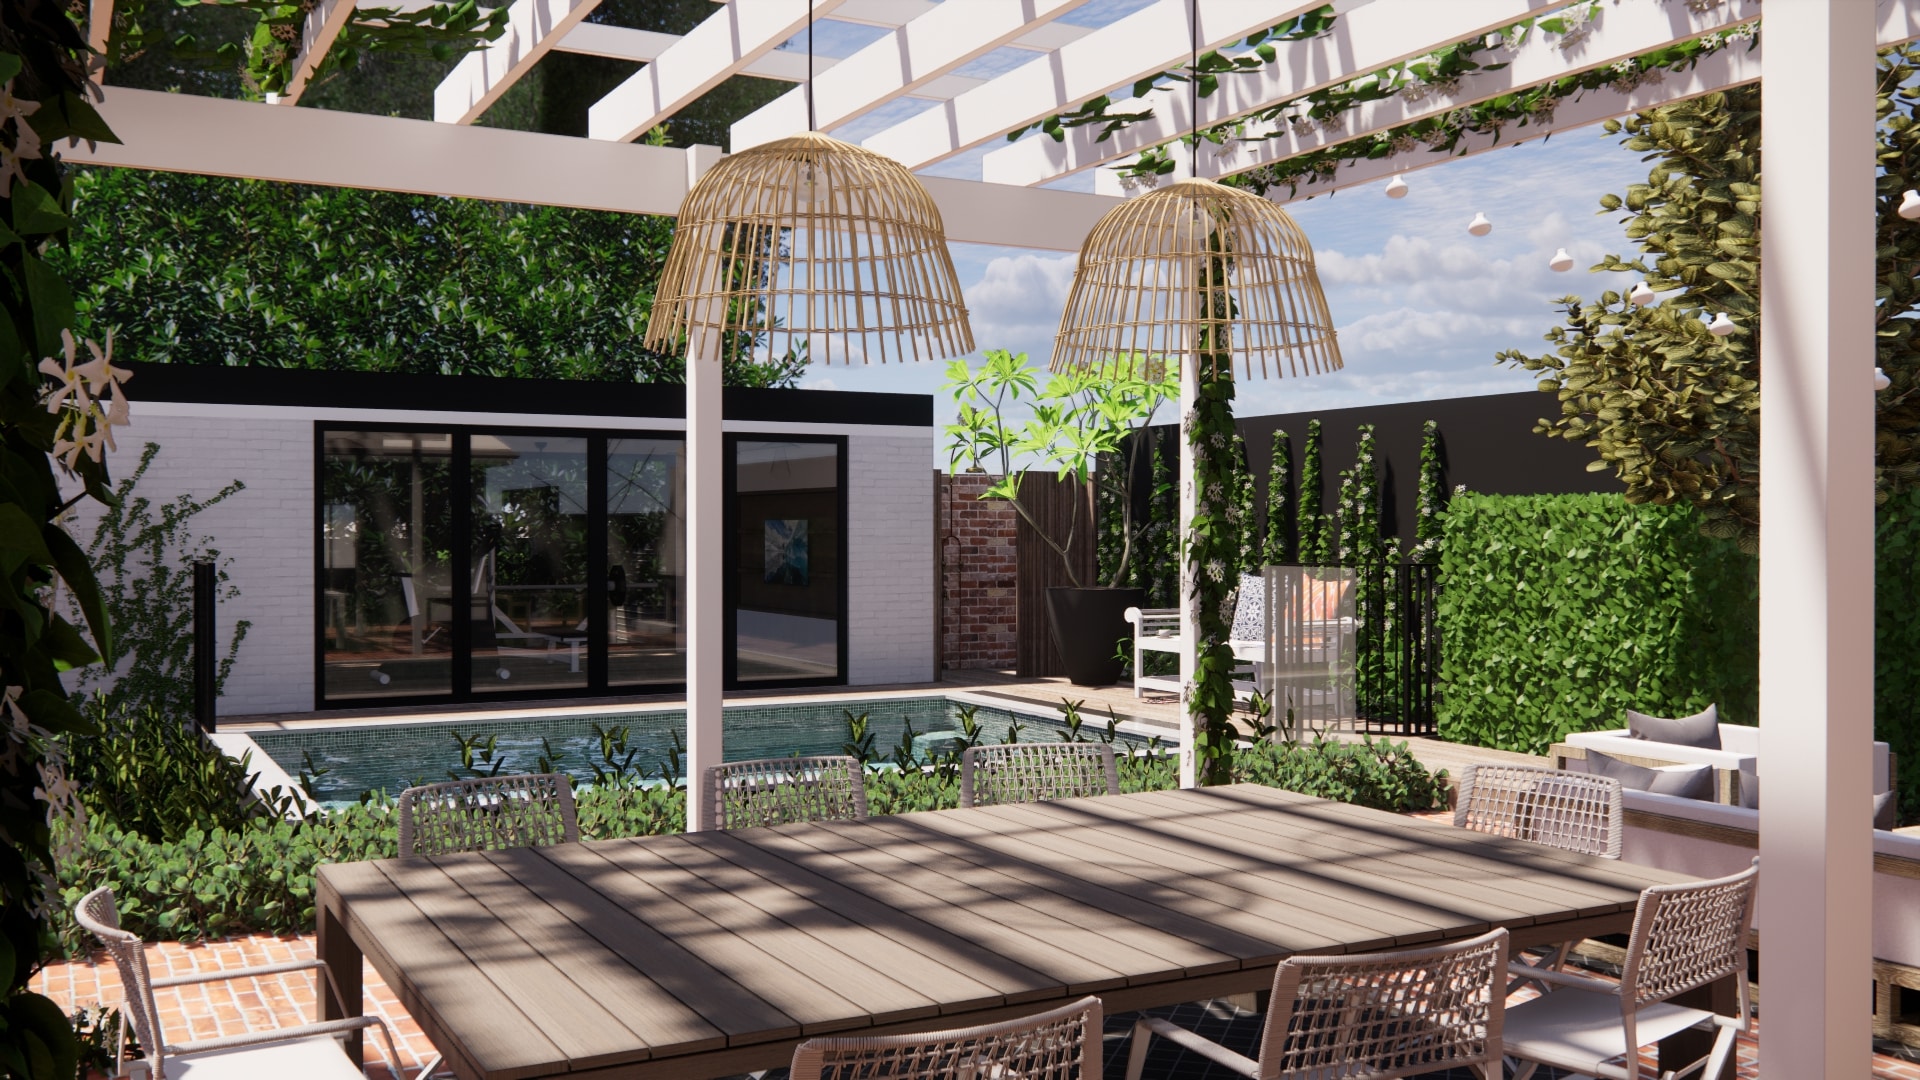 A landscape design render showing an alfresco area, tiled pool and stand-alone gym.